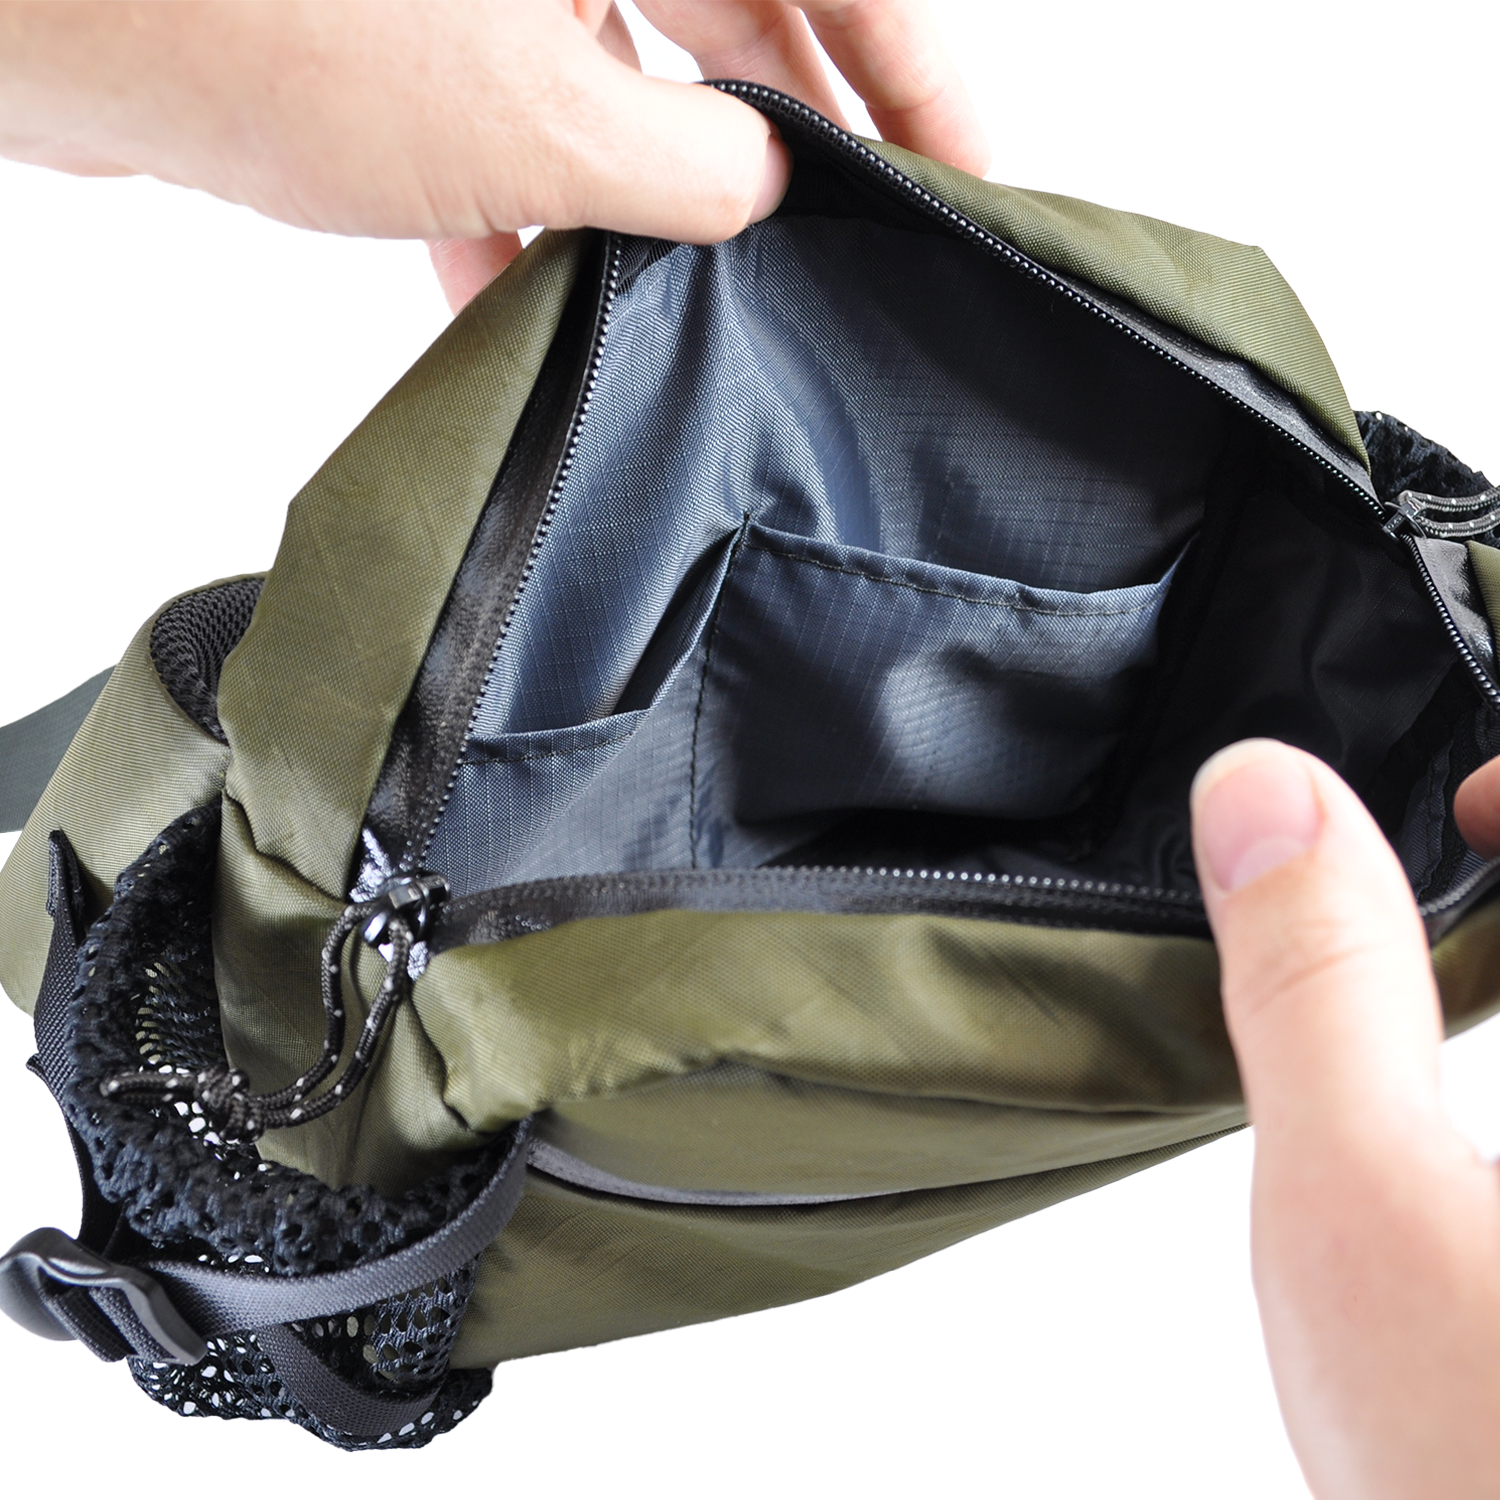 Allspeed x Flowfold Hip Pack - Recycled Olive, Interior View with Internal Slip Pockets